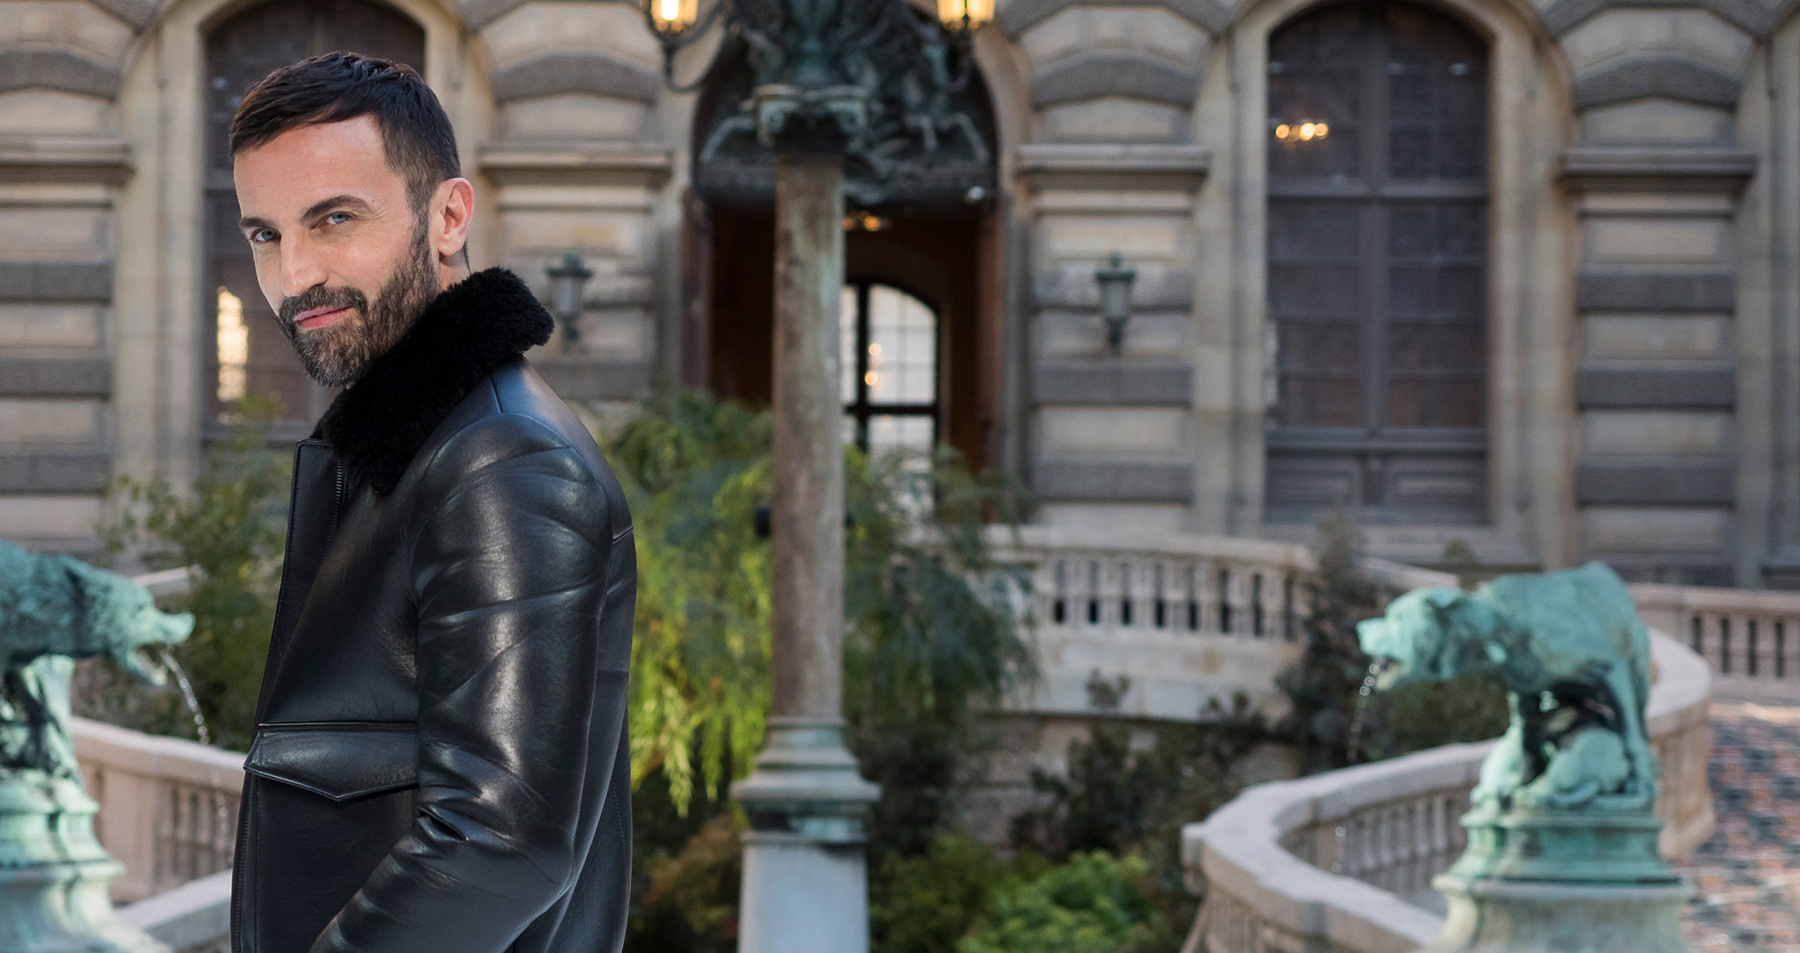 Nicolas Ghesquière says recent Vuitton contract allows him to open his own  brand